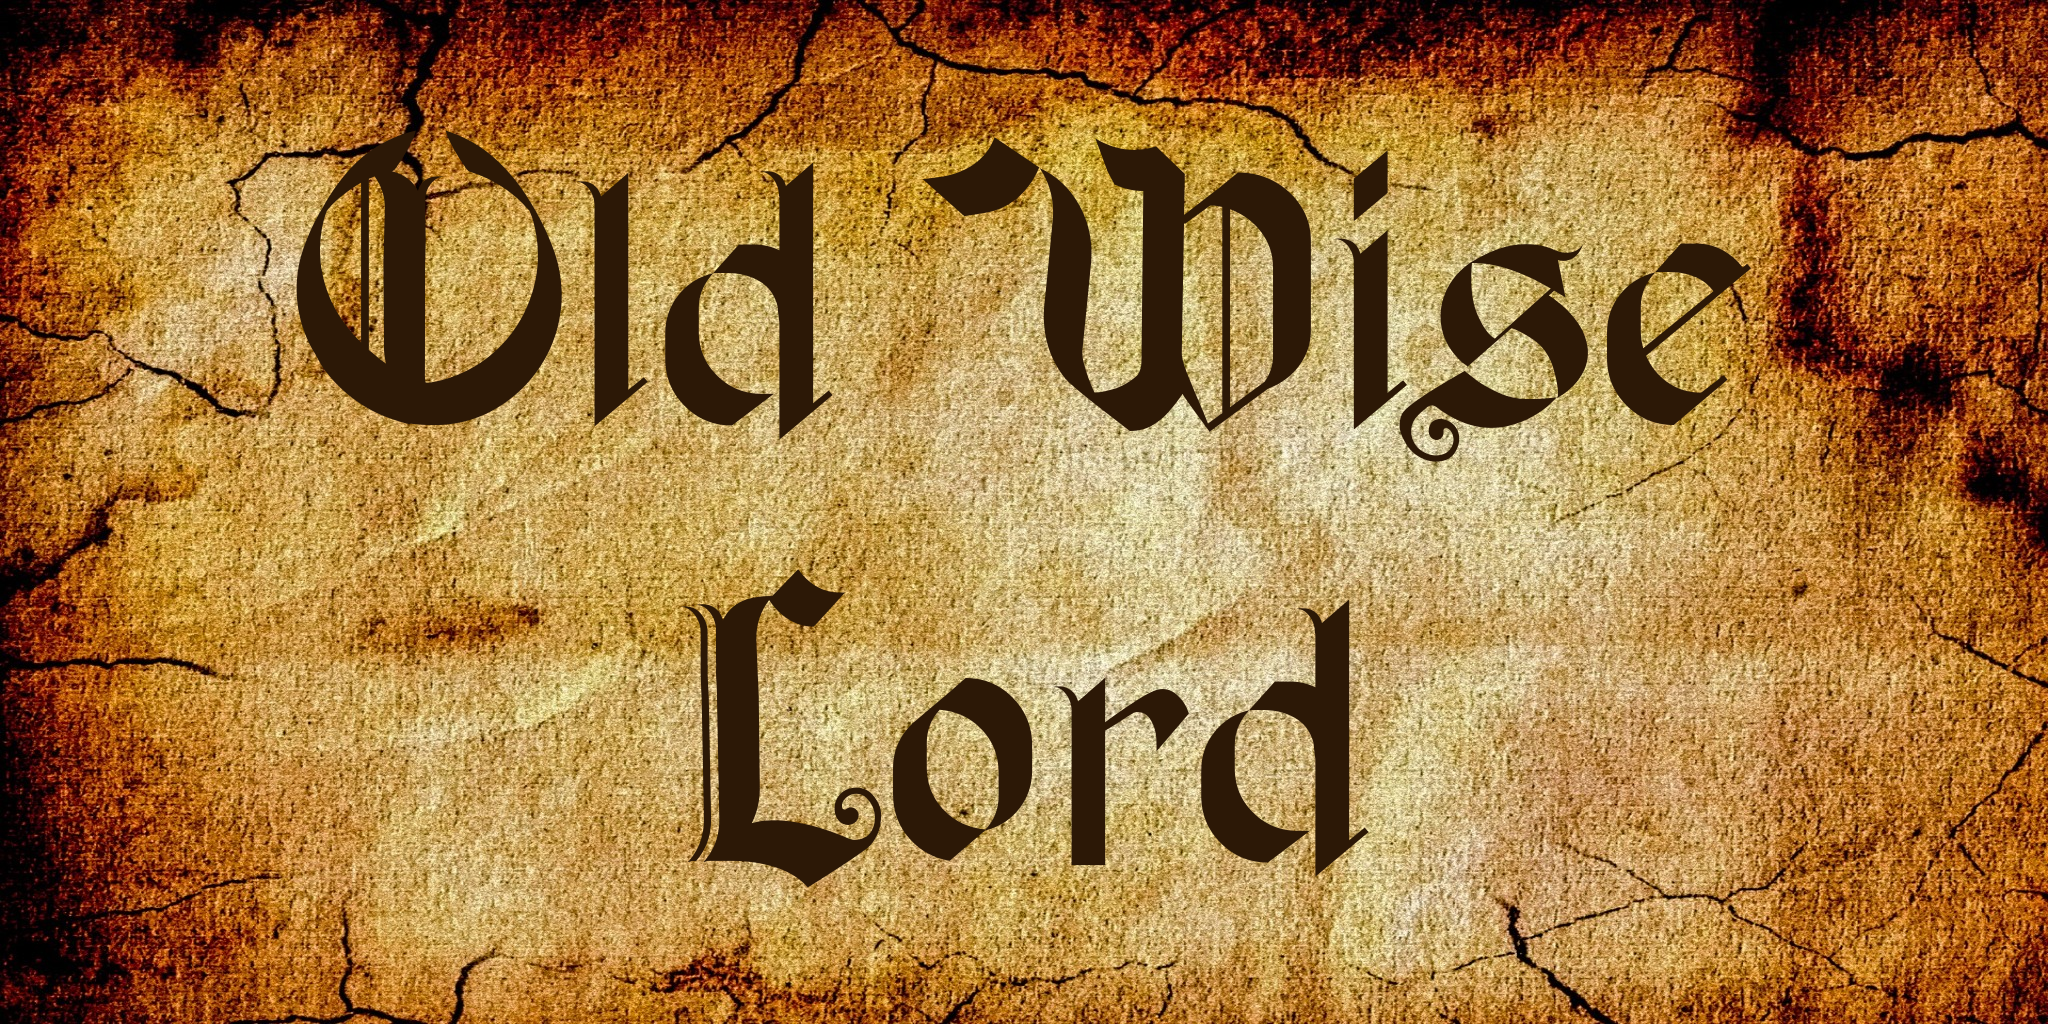 Old Wise Lord